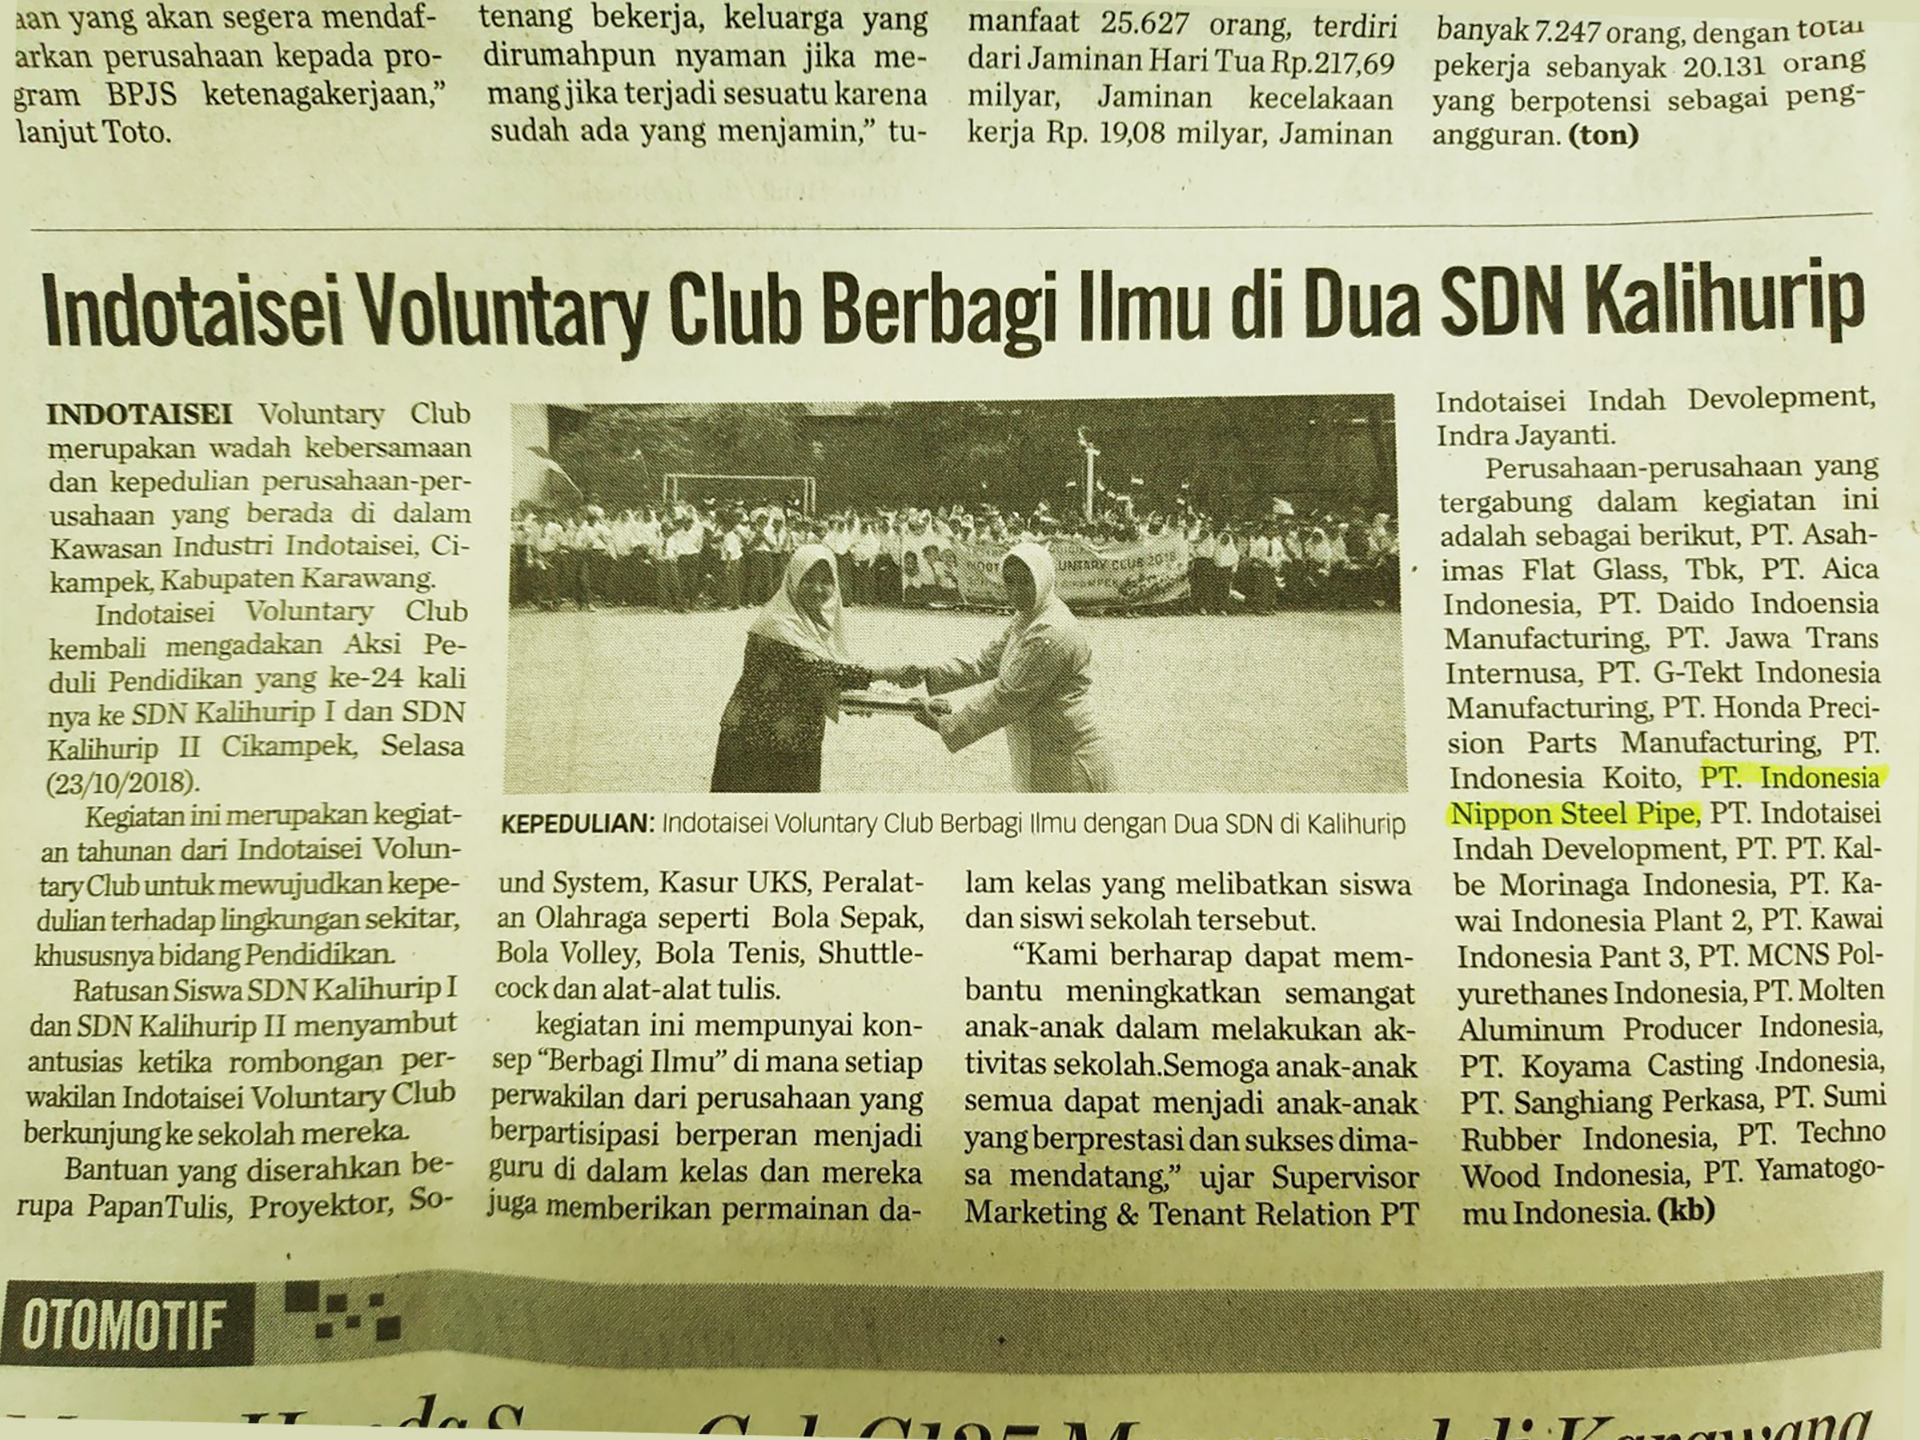 PT. Indonesia Nippon Steel Pipe joining the Indotaisei Voluntary Club